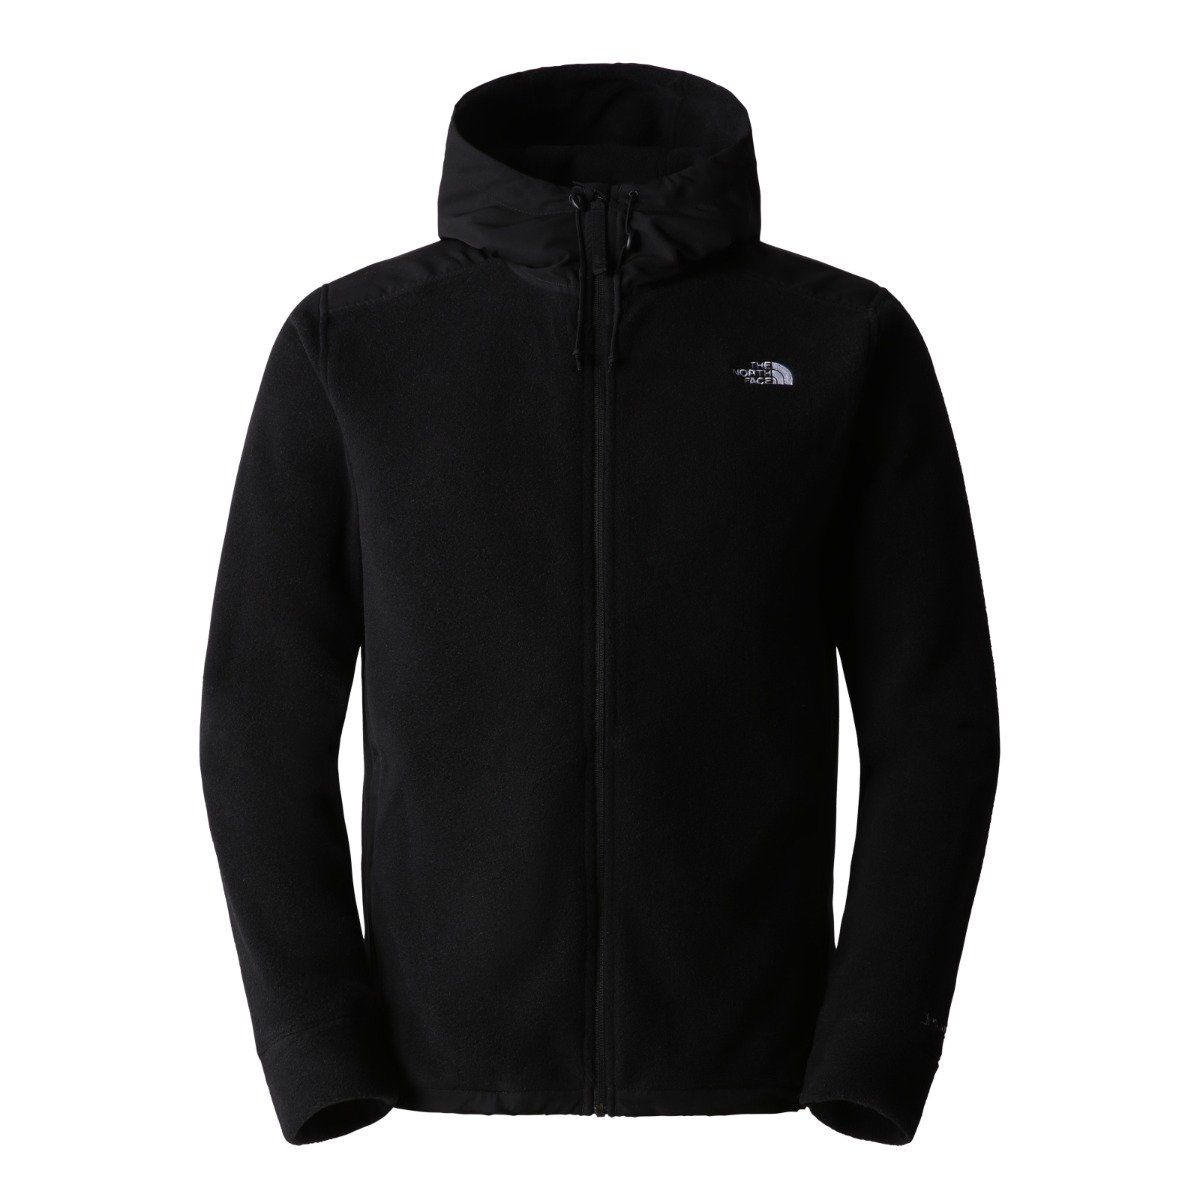 The North Face - M's ALPINE POLARTEC 200 F/Z HOODED JACKET